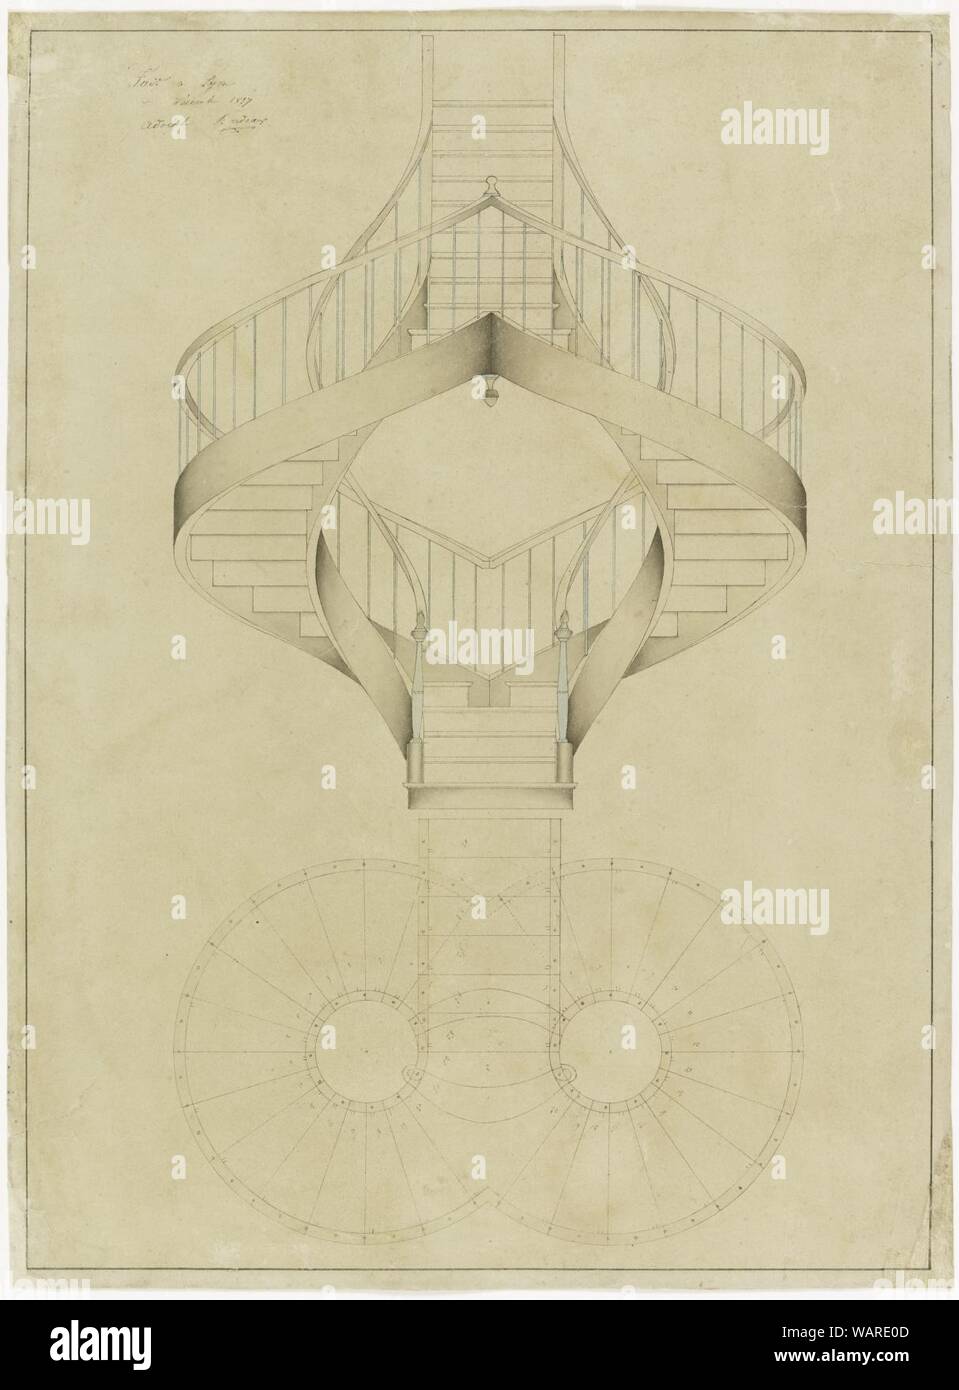 Drawing, Elevation and Plan View for a Double Spiral Staircase, December 1887 Stock Photo